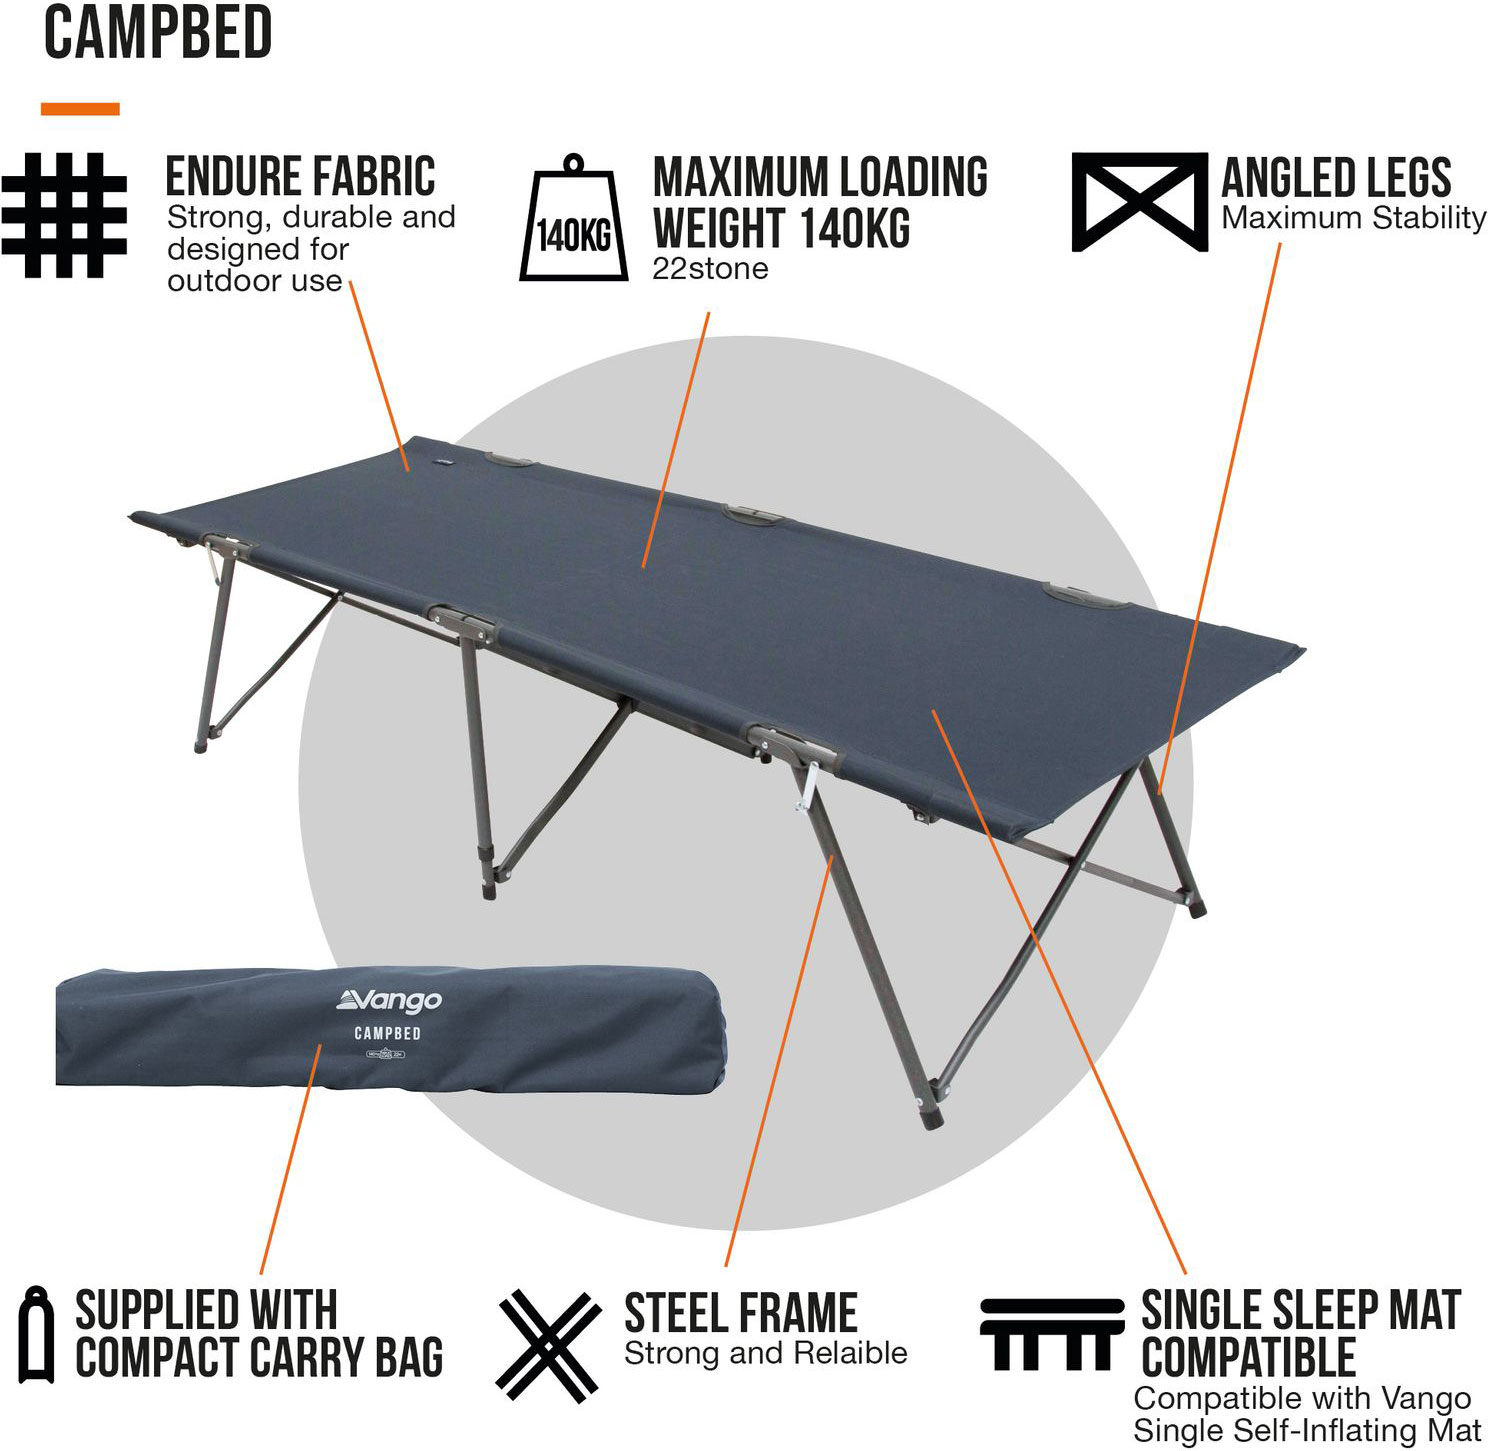 Camping bed